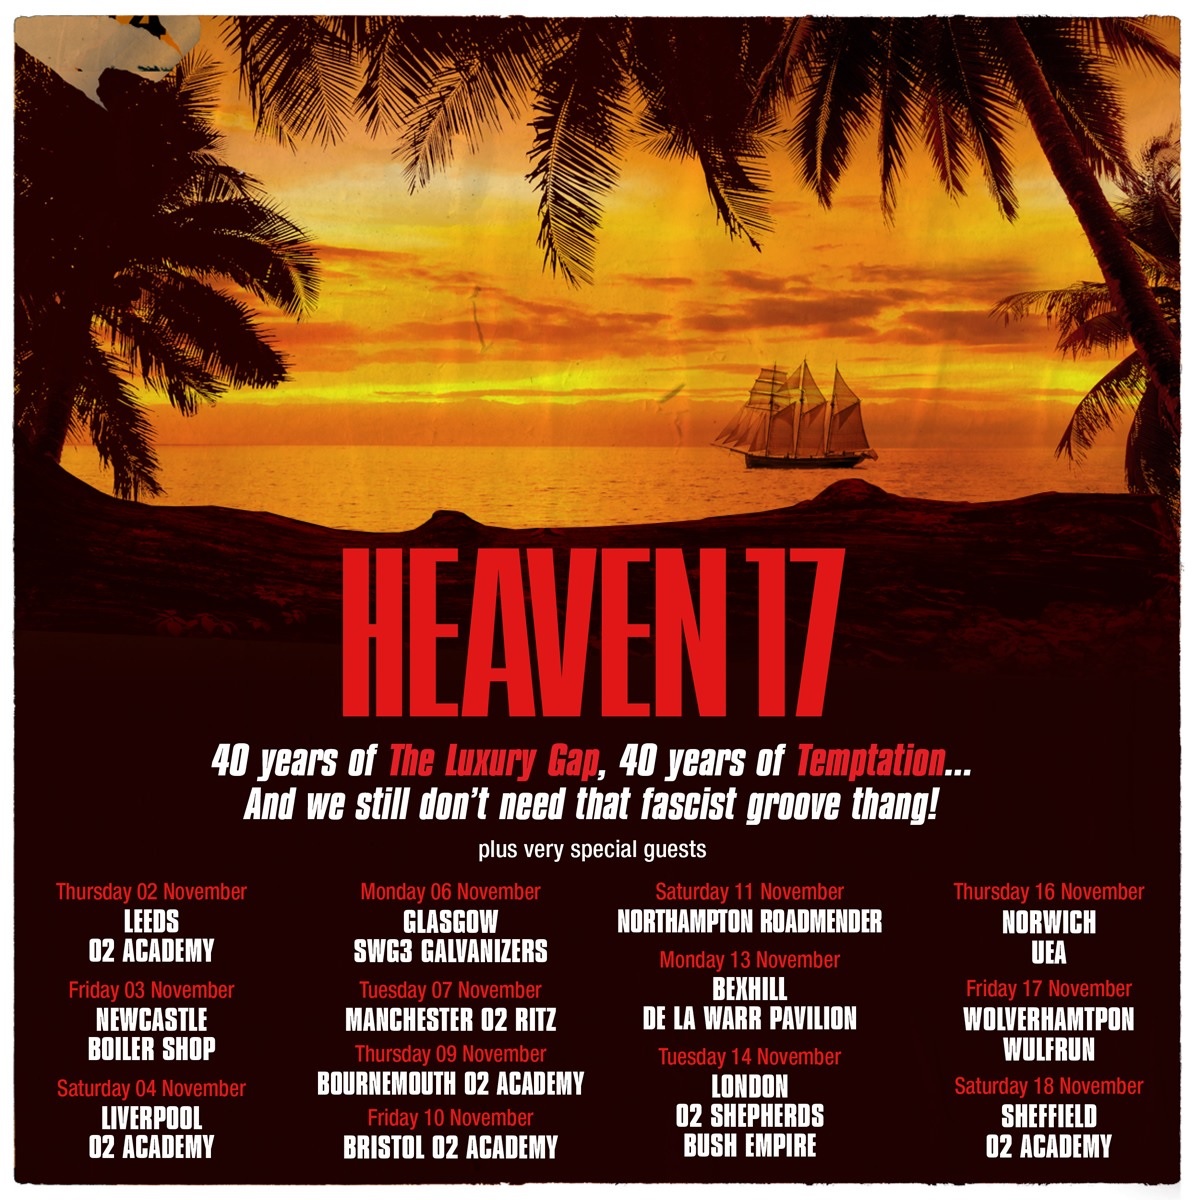 who is supporting heaven 17 on tour